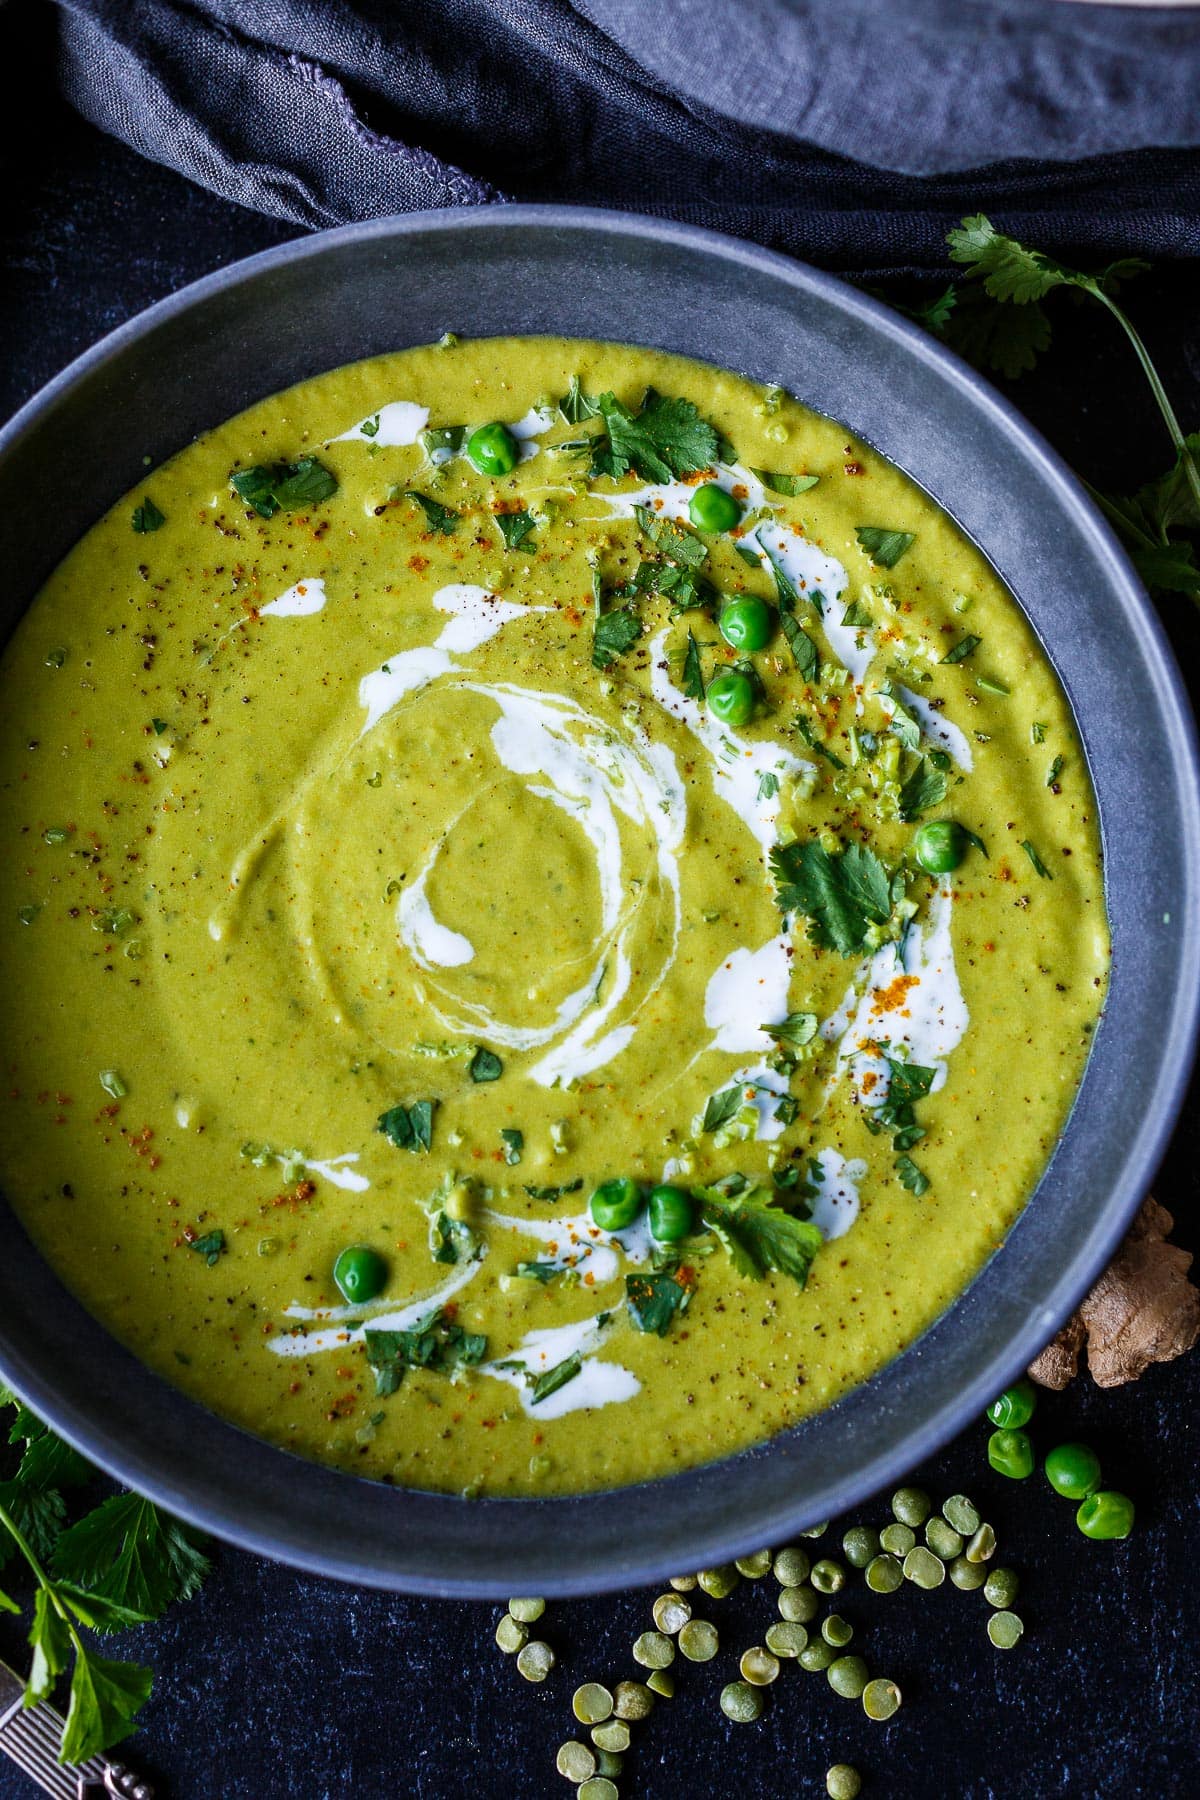 This Curried Split Pea Soup is a fresh take on the traditional. Creamy and delicious, enhanced with yellow curry, coconut milk and fresh peas.